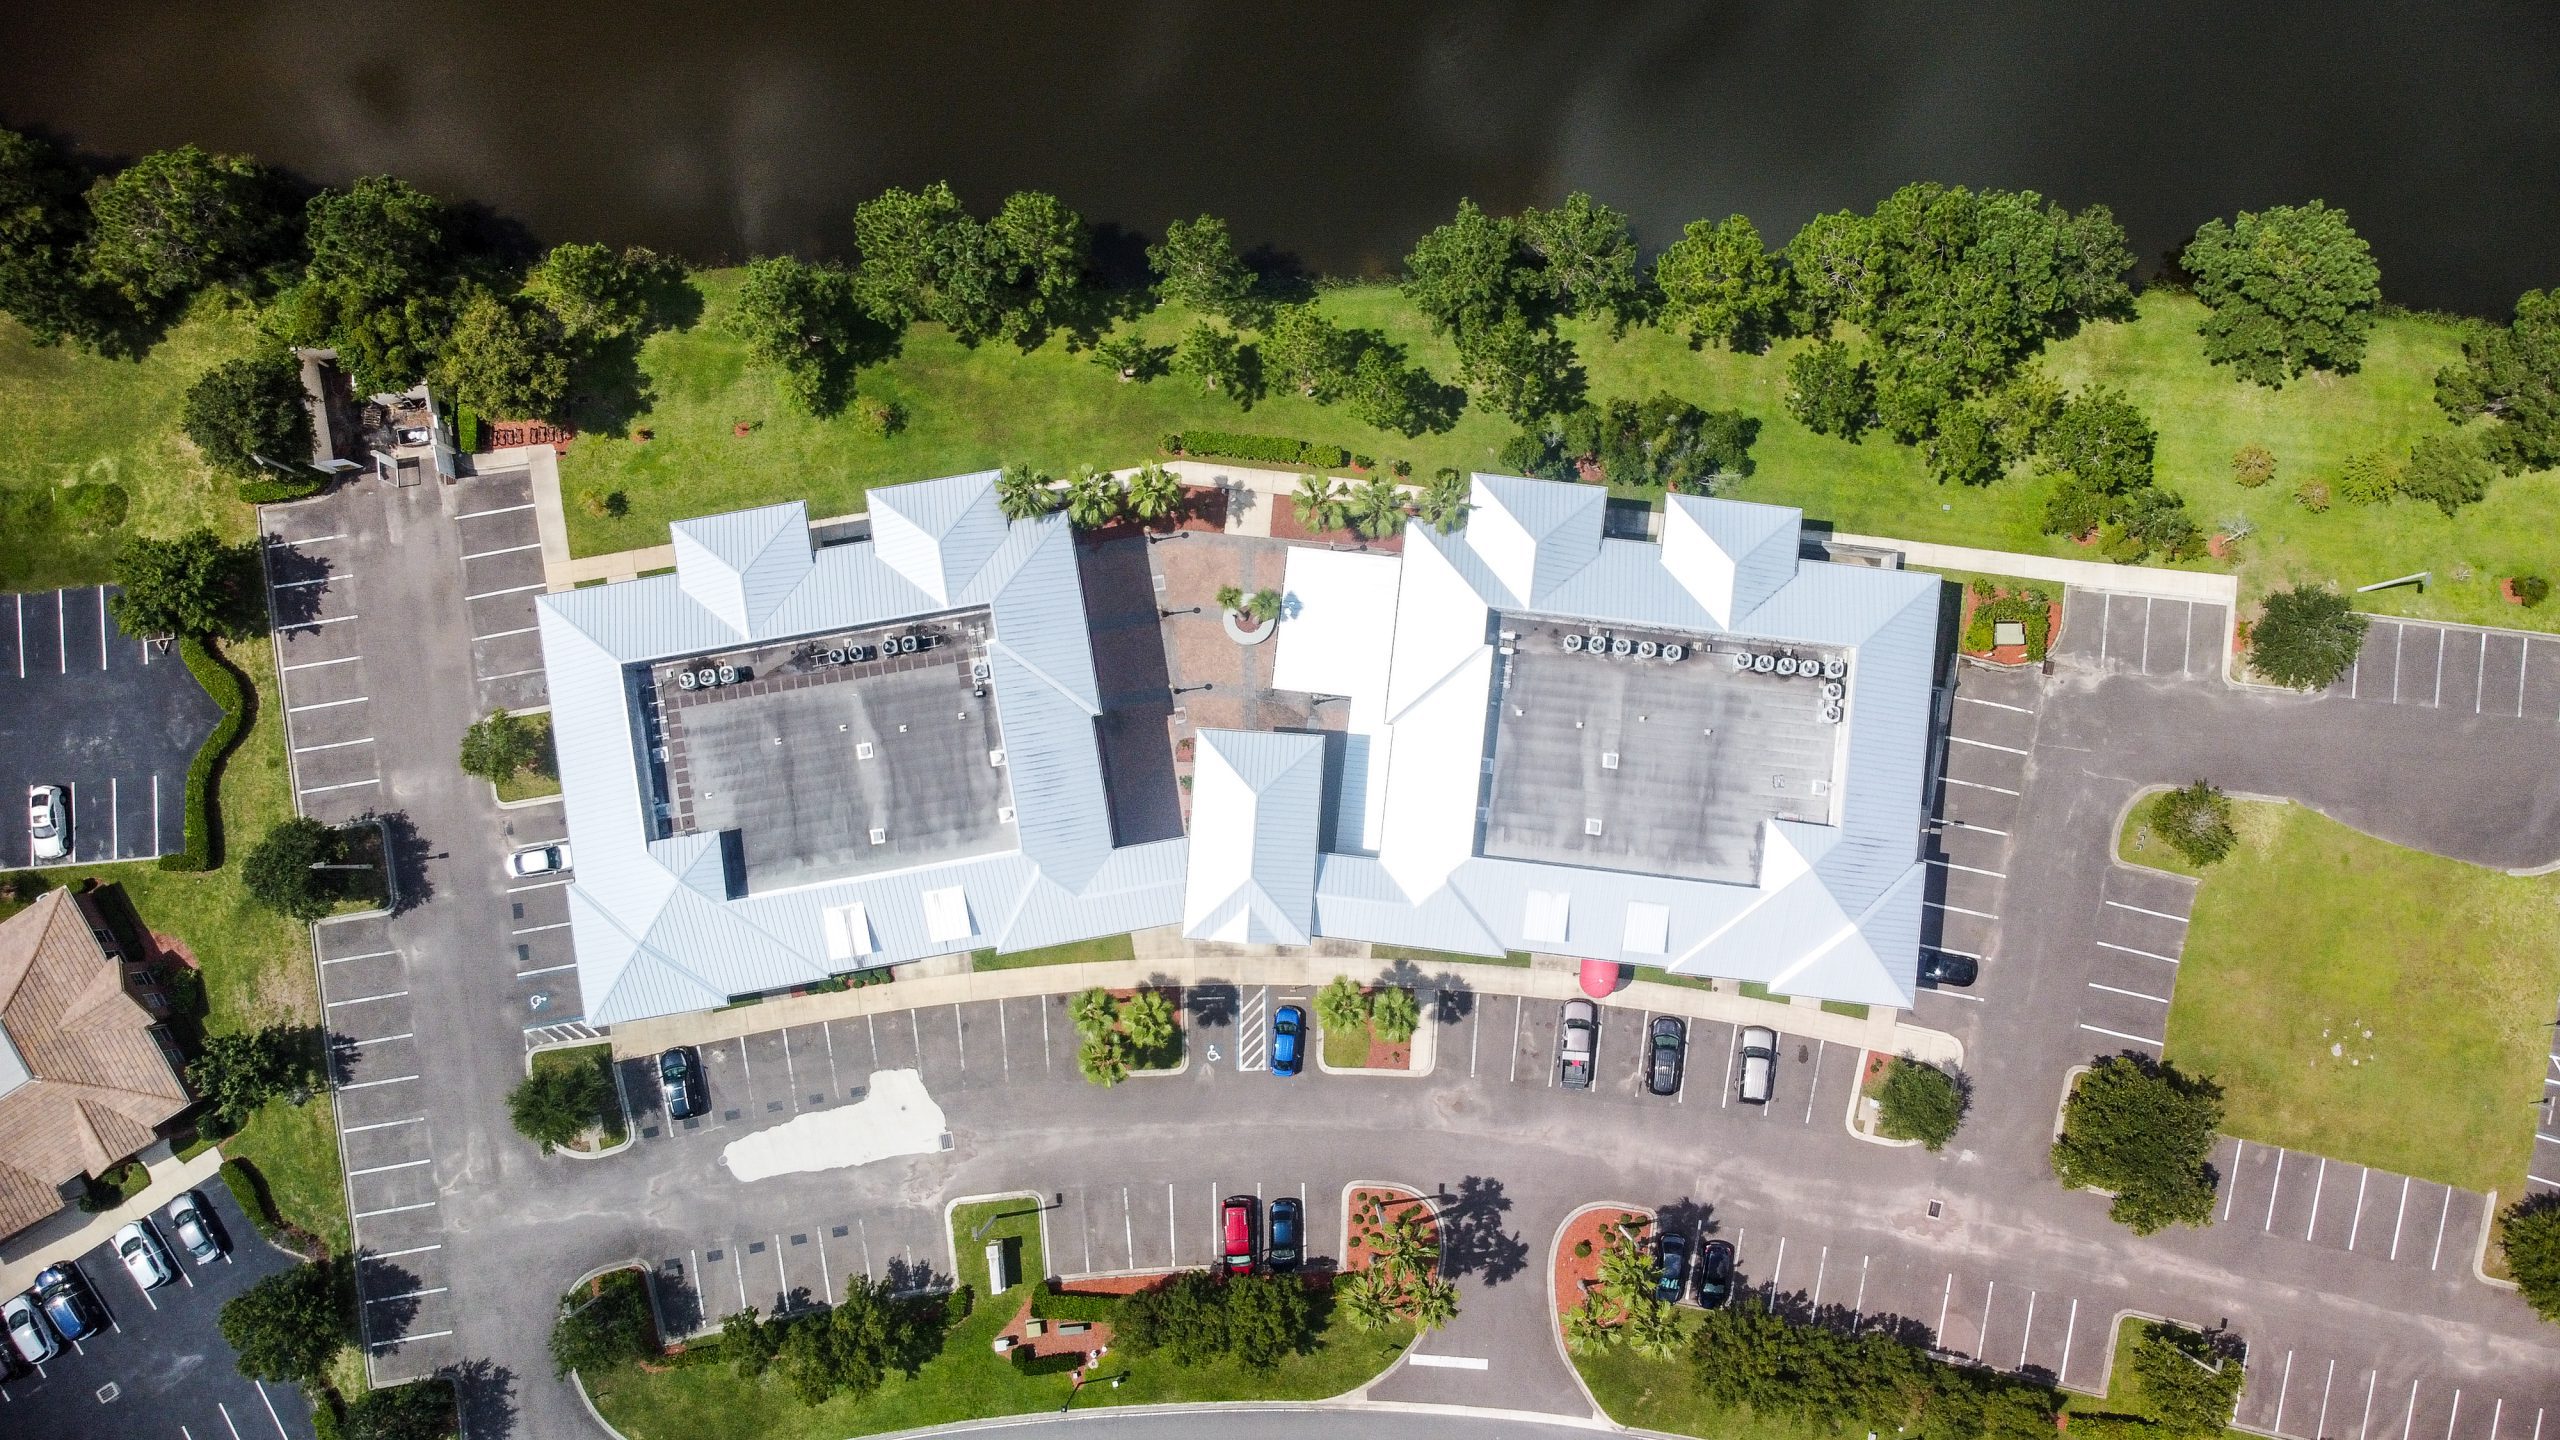 An aerial view of a two-story office/retail center.